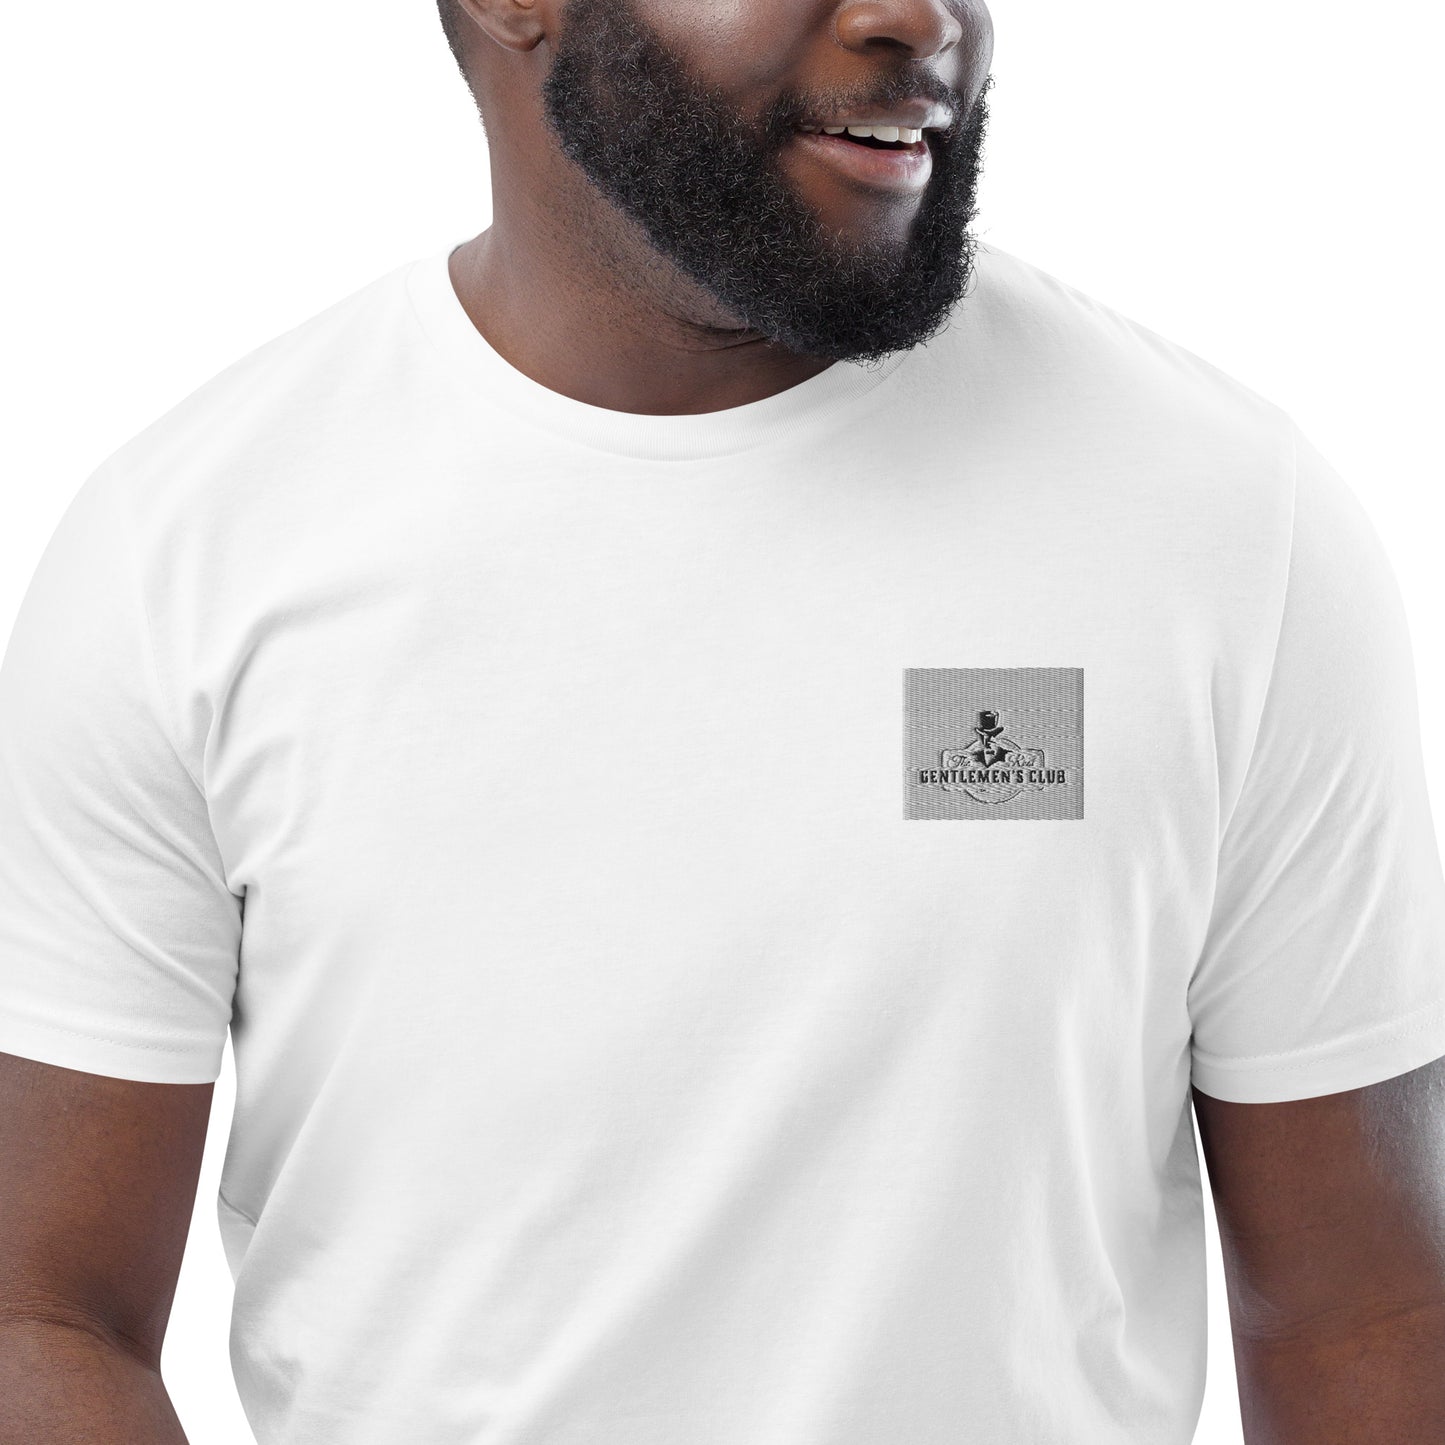 Extremely comfy Gentlemens club organic cotton t-shirt